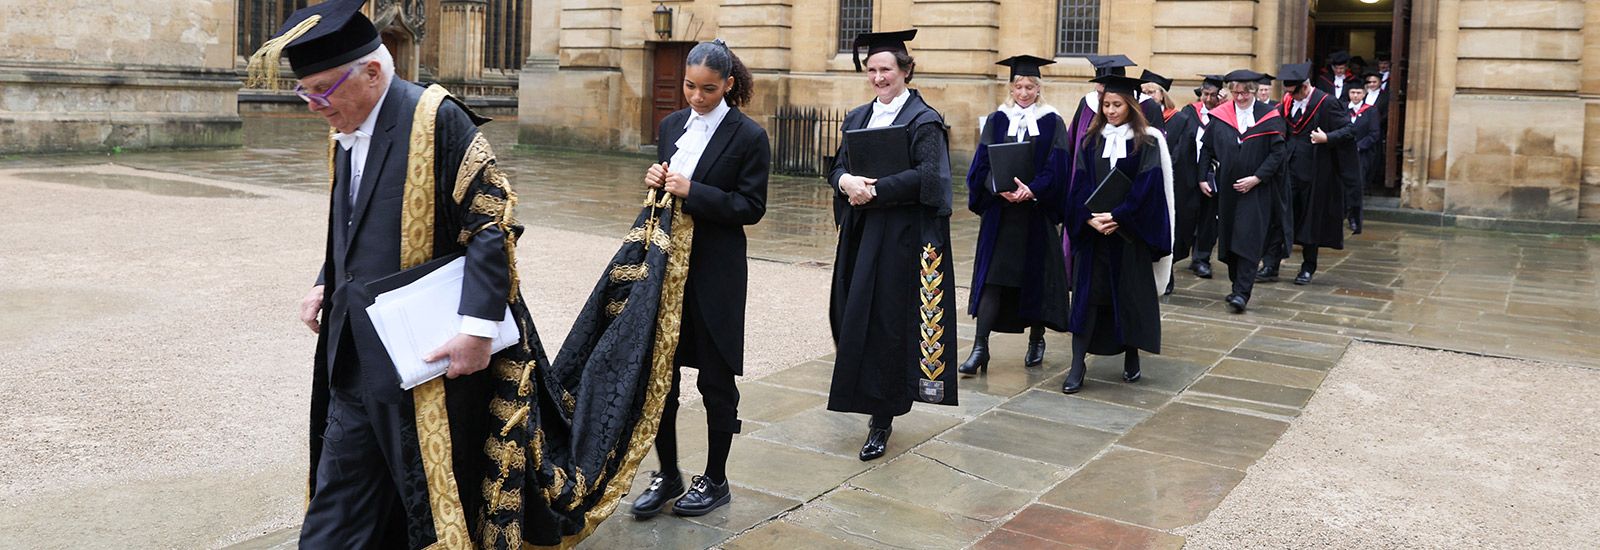 Procession of the Vice-Chancellor Professor Irene Tracey from the Sheldonian Theatre